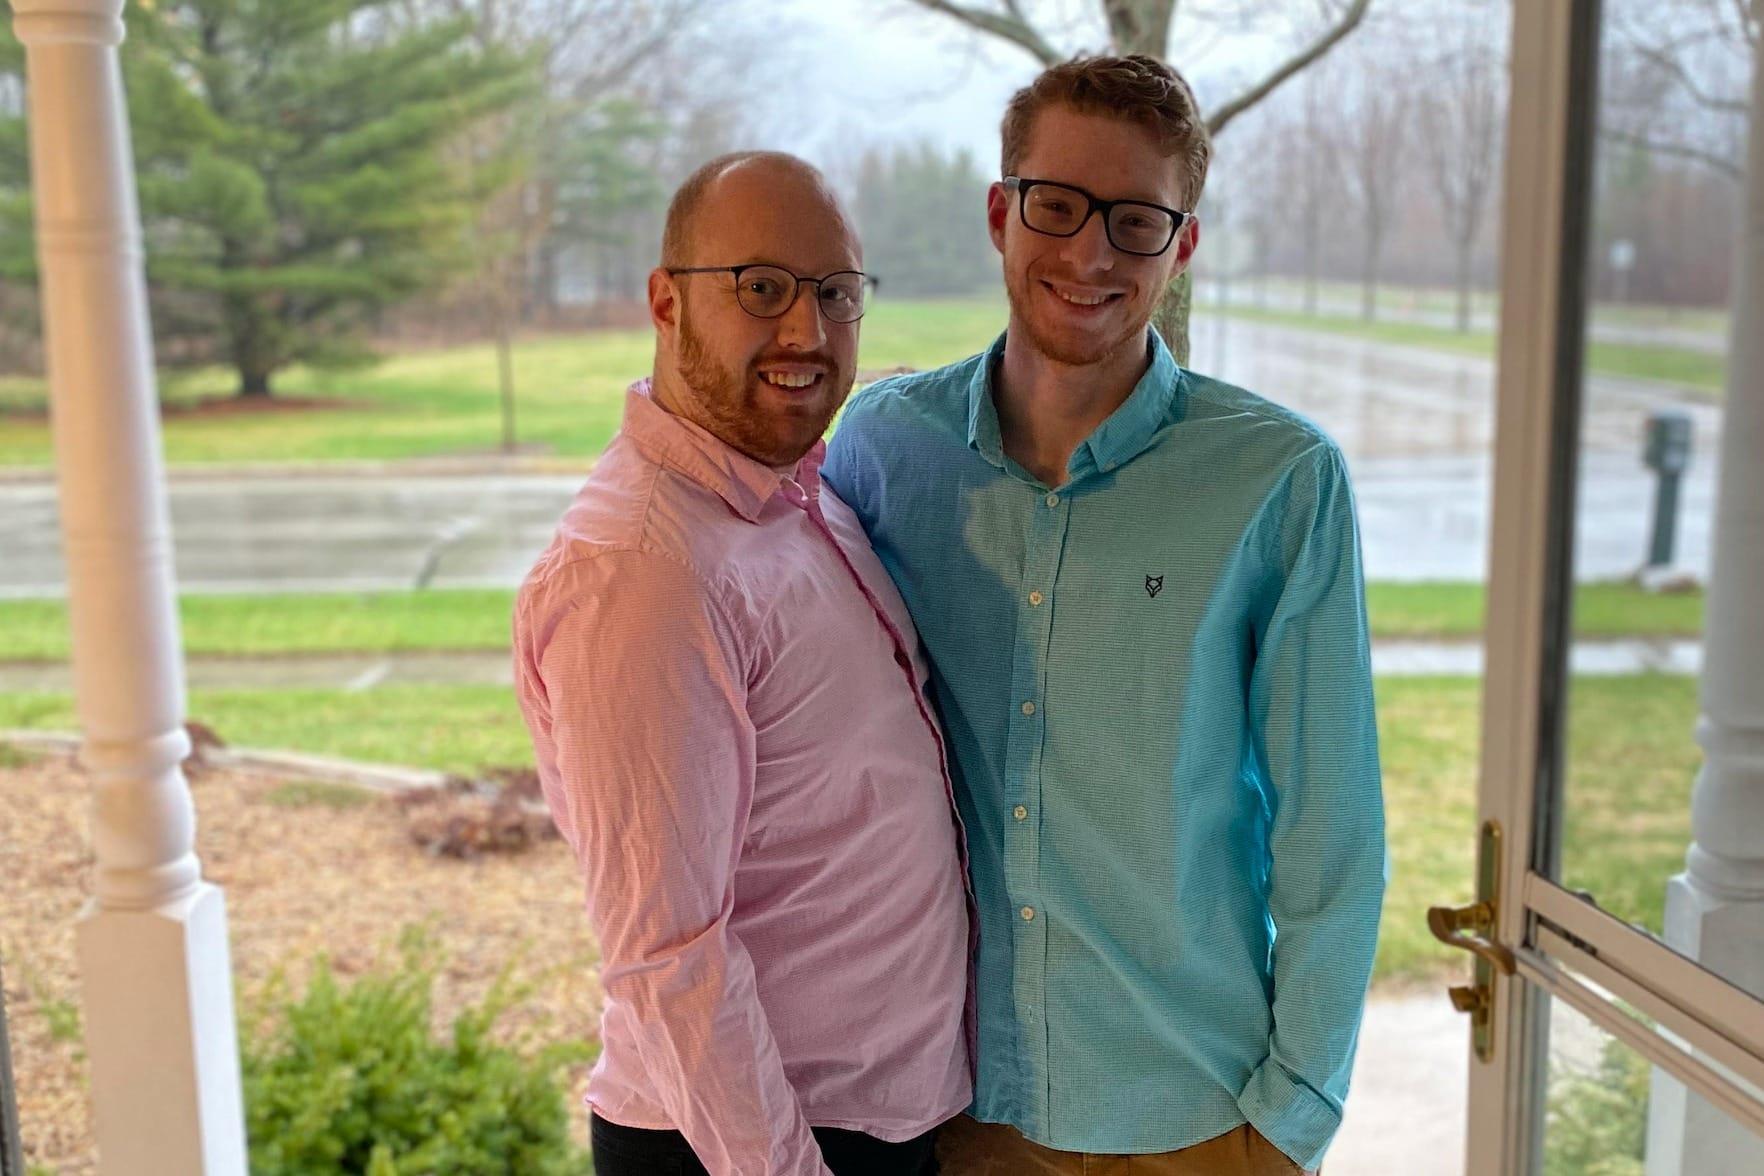 Through Long Distance and Tough Times, Anthony and Tyler Found True Partnership